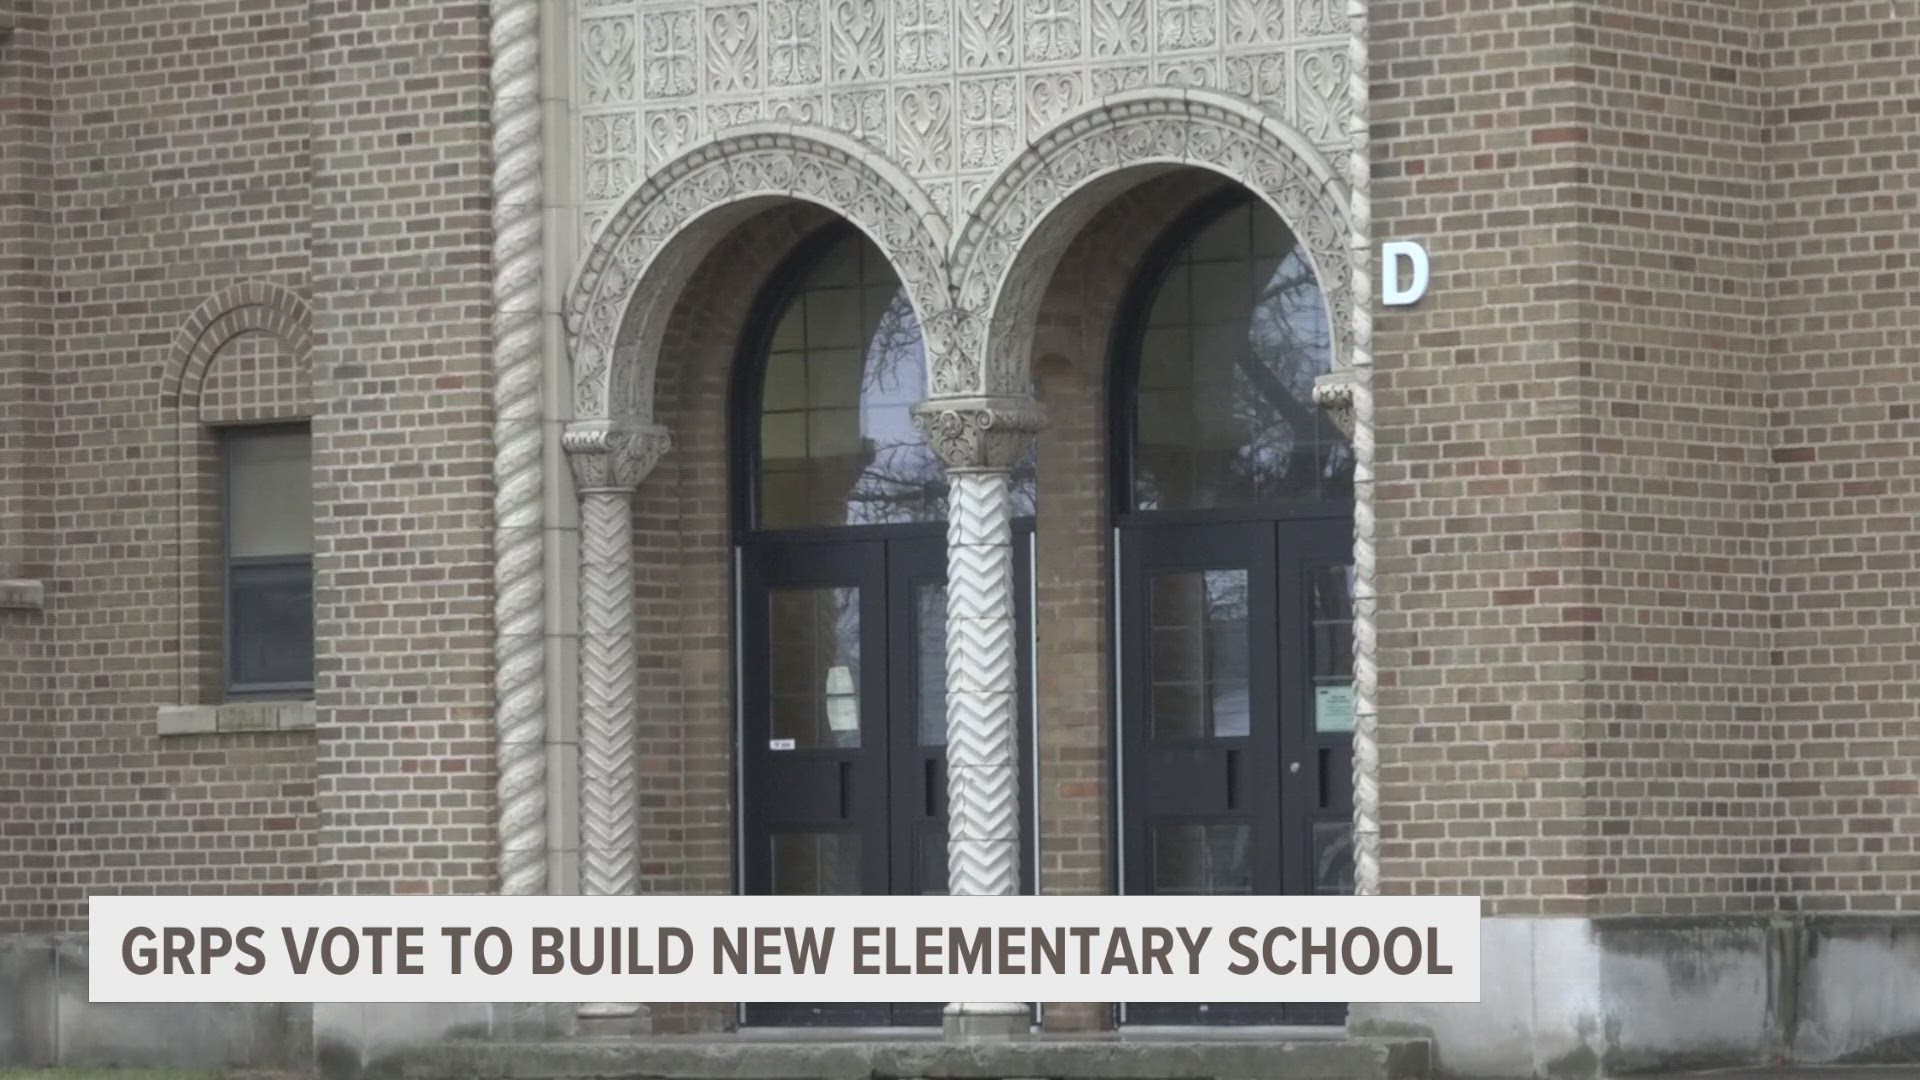 If the proposal is approved by the board tonight, the new school will be the first one built on the northeast side since 1965.